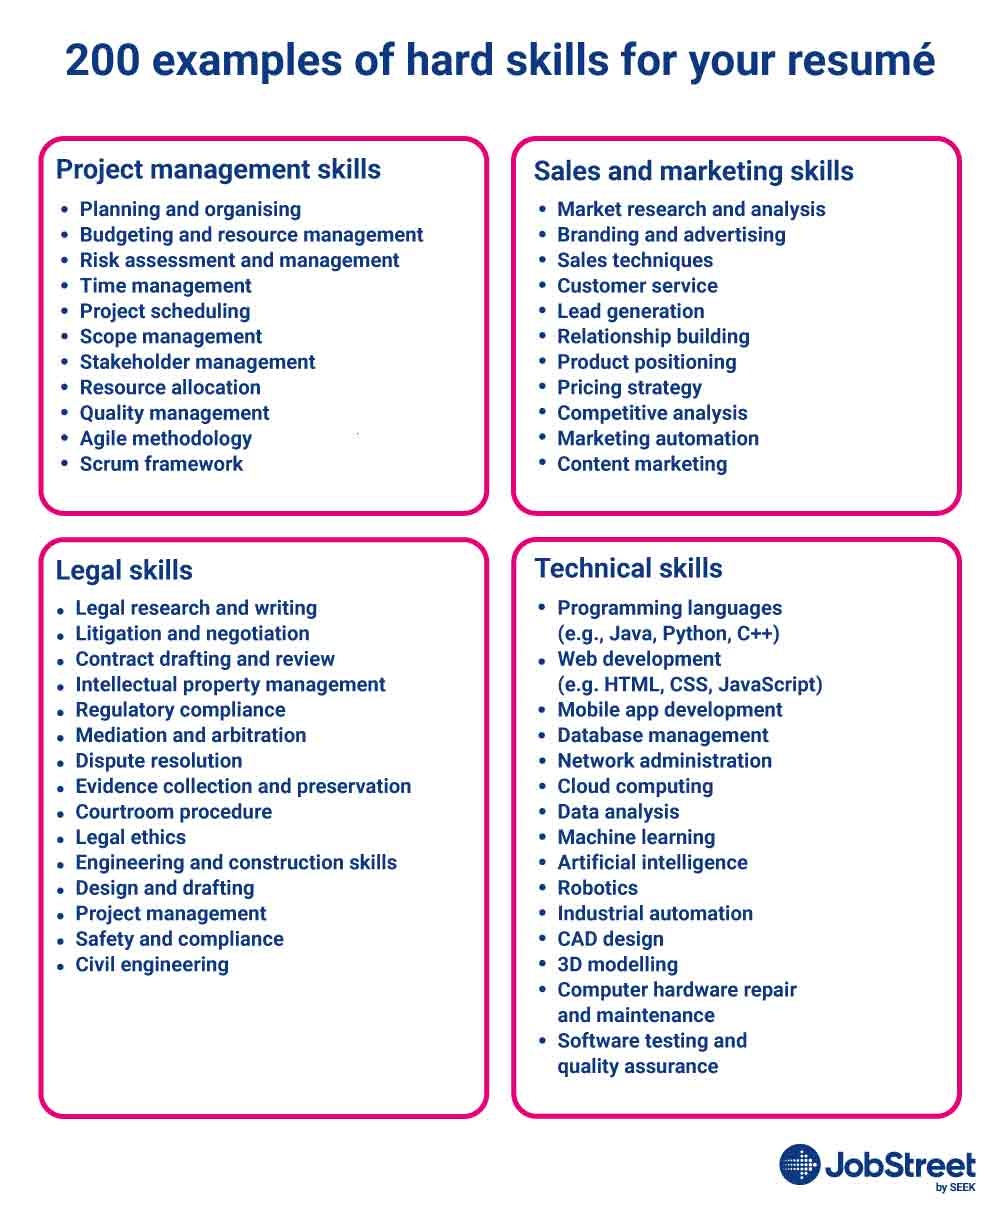 Examples of hard skills for your resumé - project management, sales and marketing, legal, technical